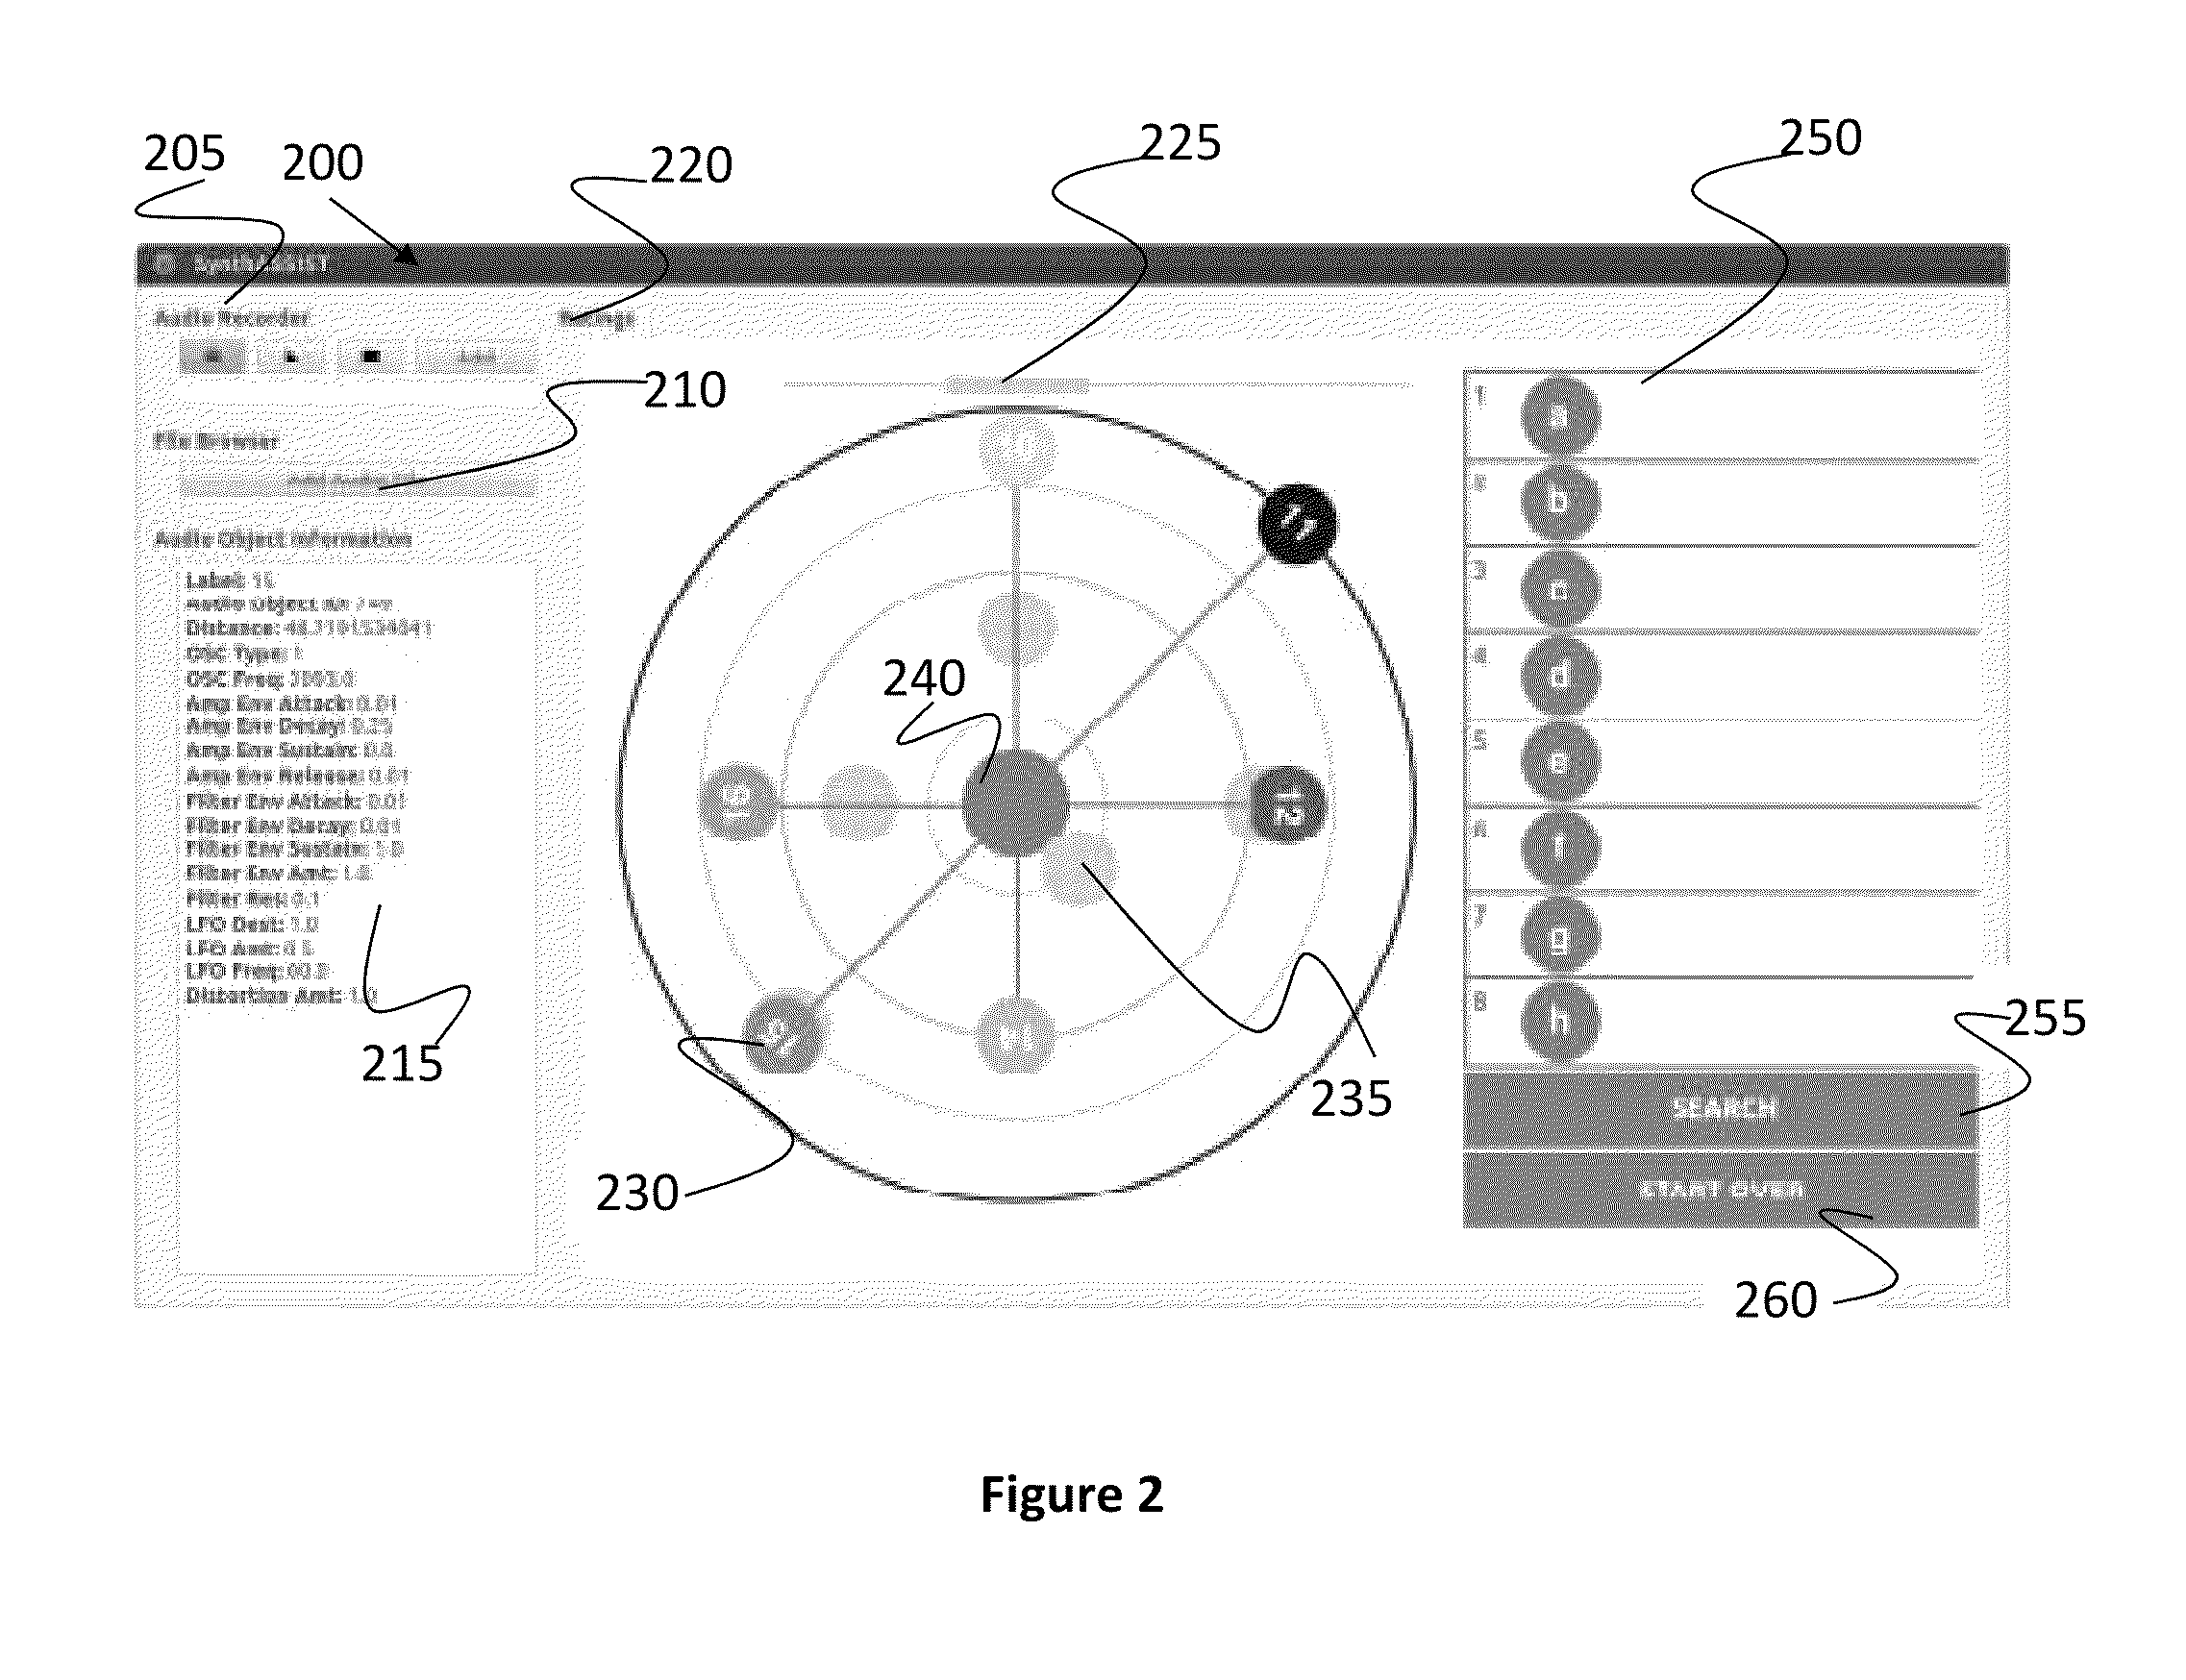 Systems, methods, and apparatus to search audio synthesizers using vocal imitation